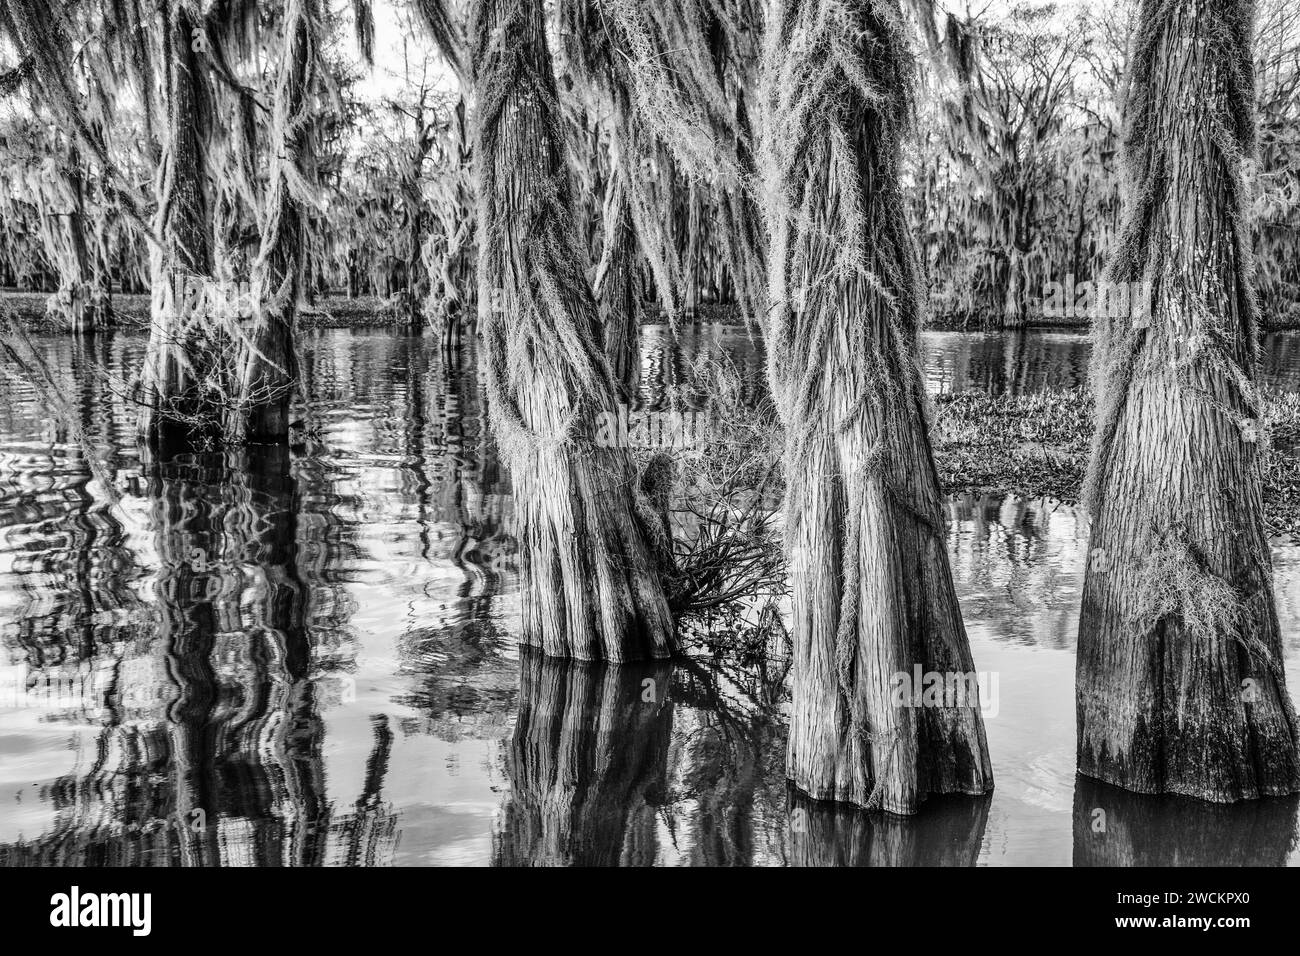 Spanish moss on bald cypress trees in a lake in the Atchafalaya Basin ...